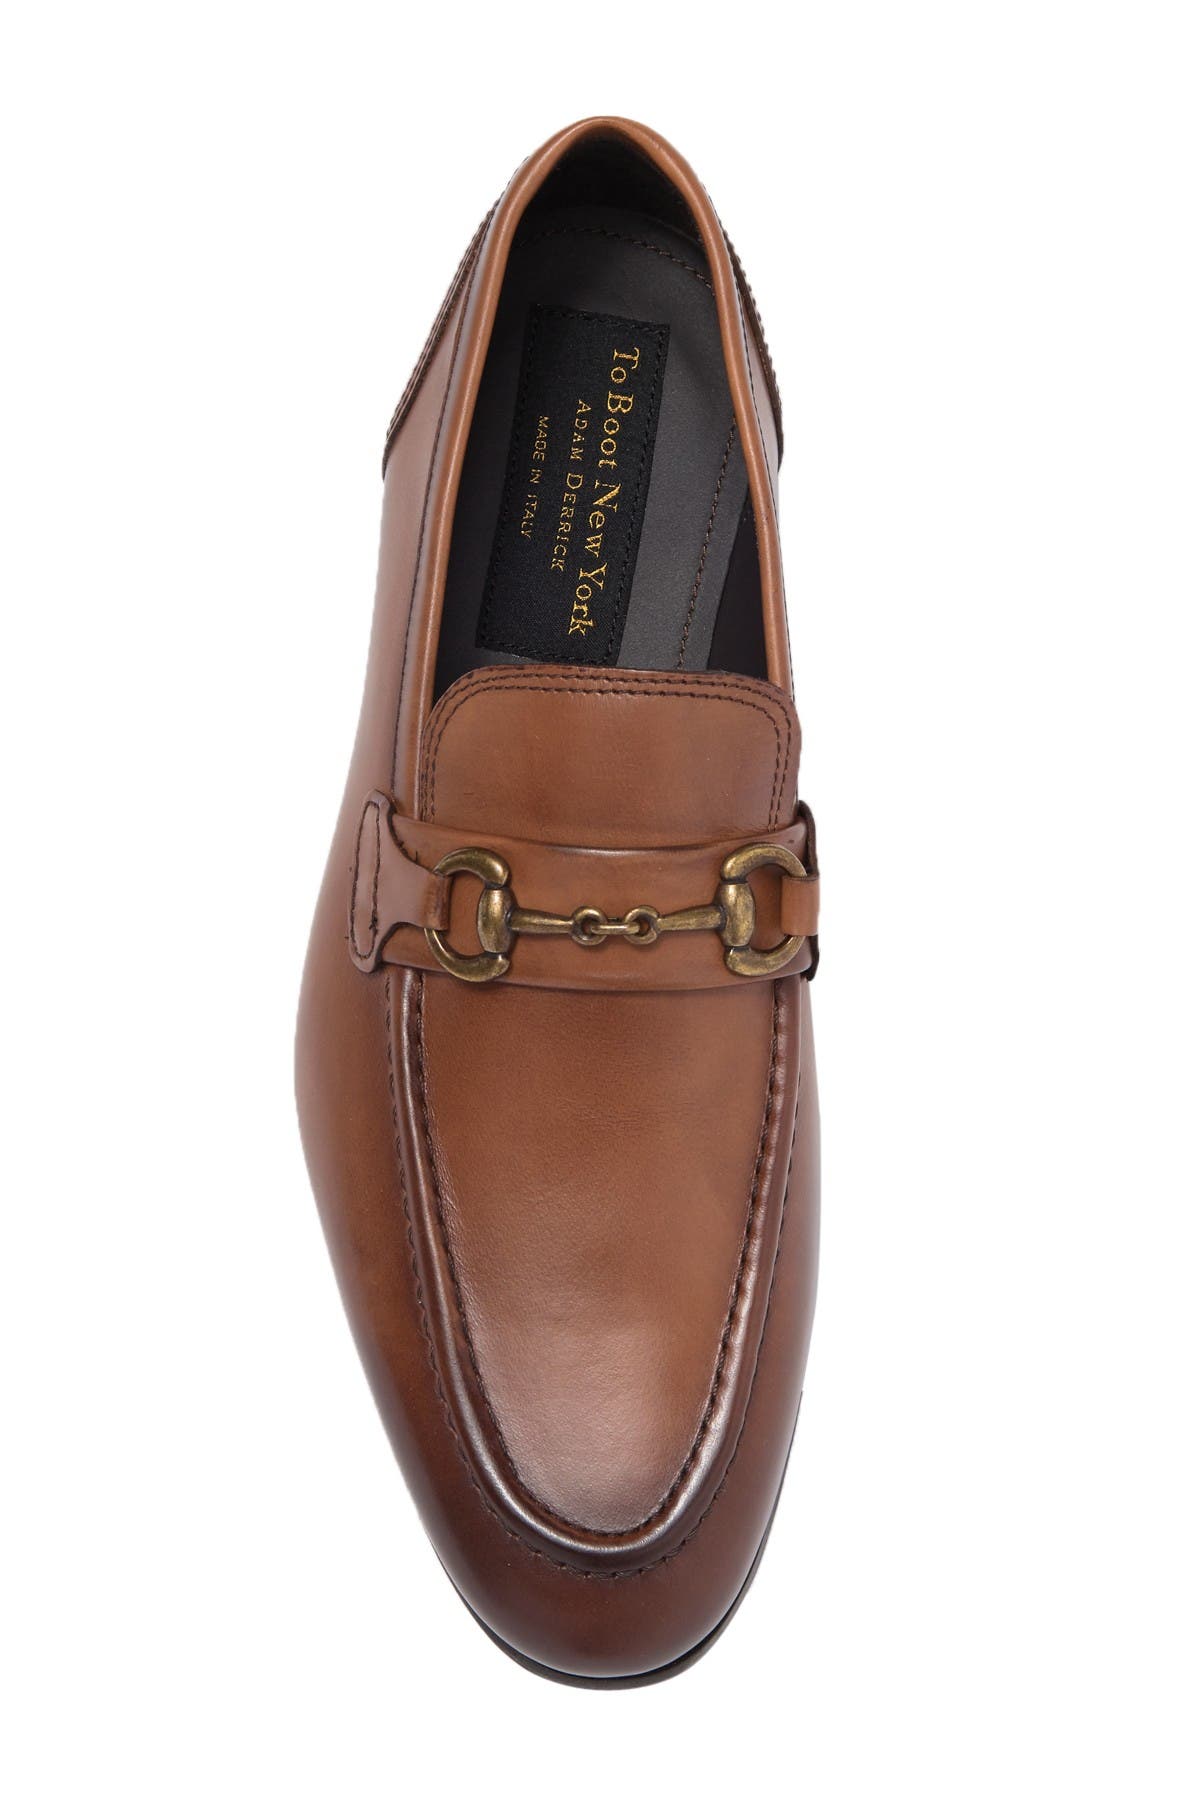 to boot new york loafers sale